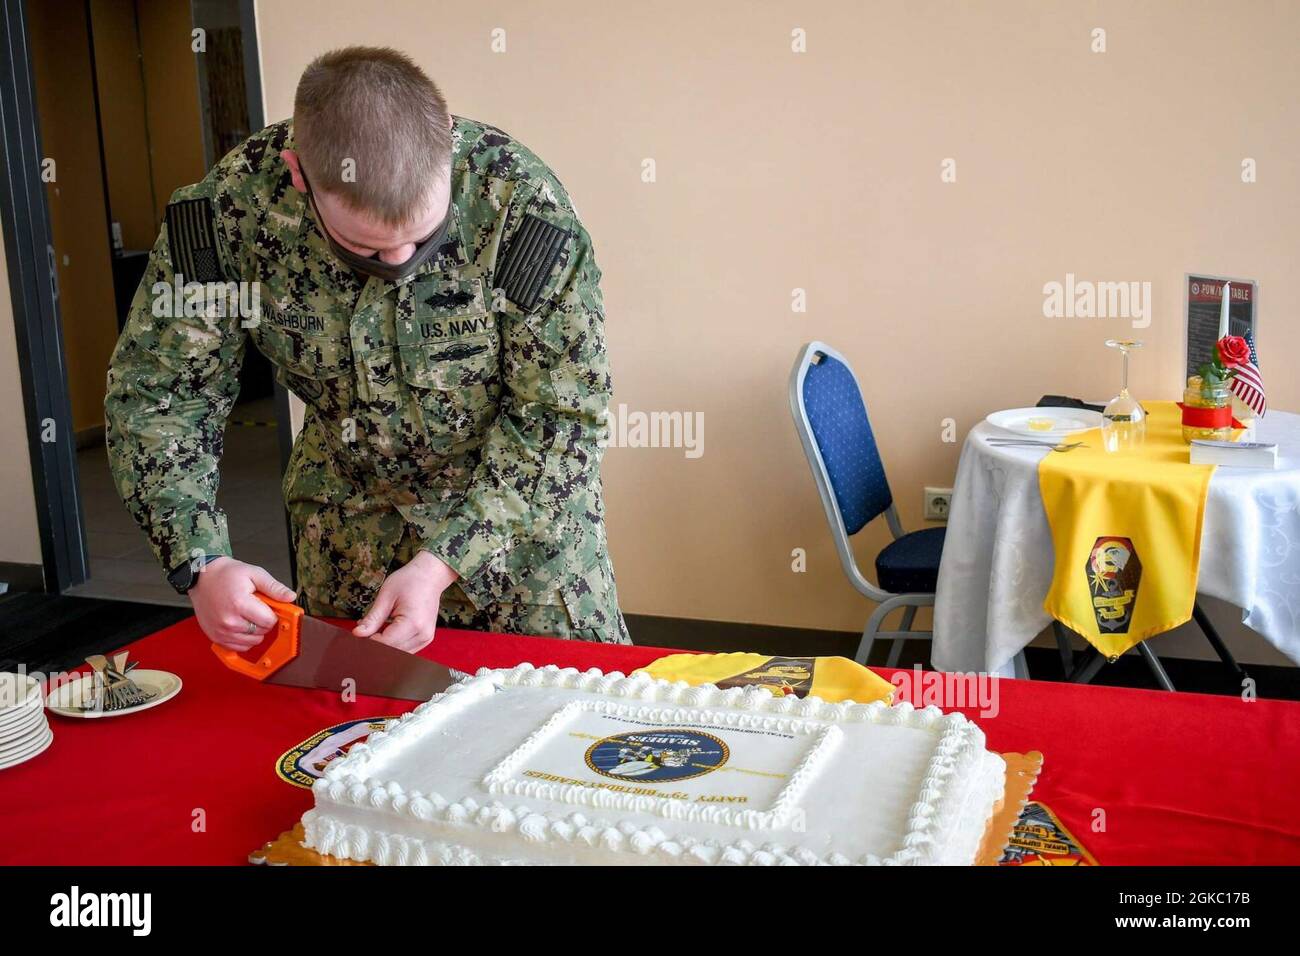 NAVAL SUPPORT FACILITY DEVESELU, Romania (March 5, 2021) Seabees, Civil Engineer Corps officers and Sailors commemorate the Naval Facilities Engineering Systems Command, Seabee and Civil Engineer Corps annual birthday. Due to the COVID-19 host nation policies, members were allowed to have a small cake cutting ceremony. Stock Photo